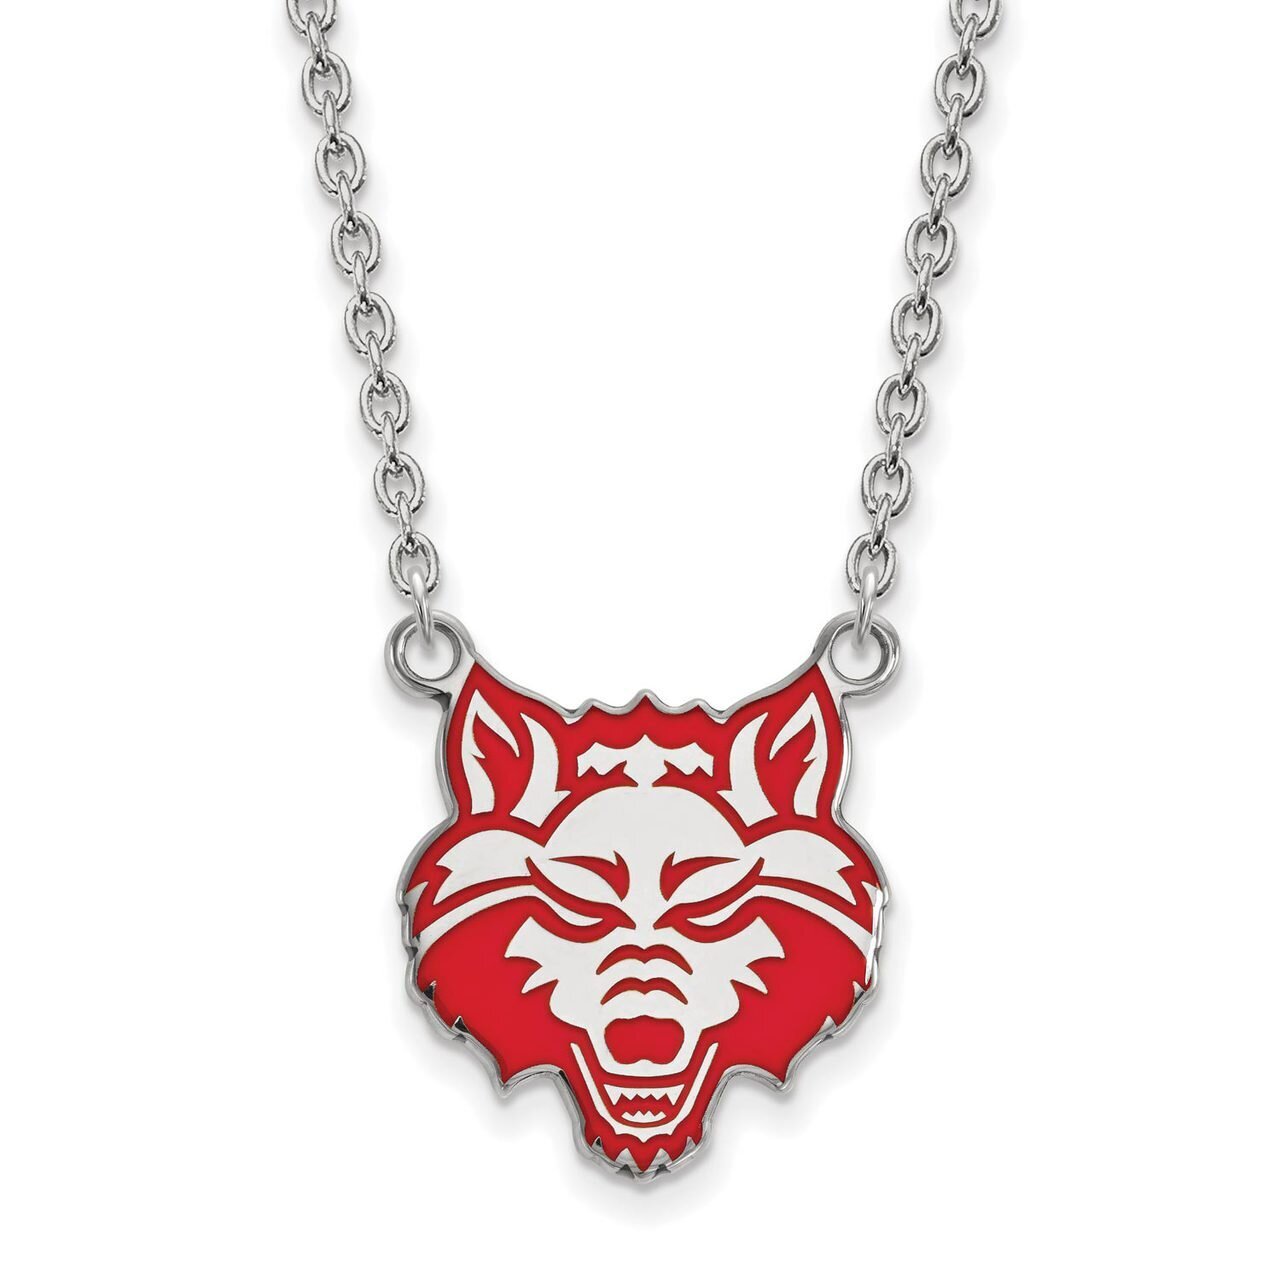 Arkansas State Unviersity Enamel Large Pendant with Chain Necklace Sterling Silver SS009ASU-18